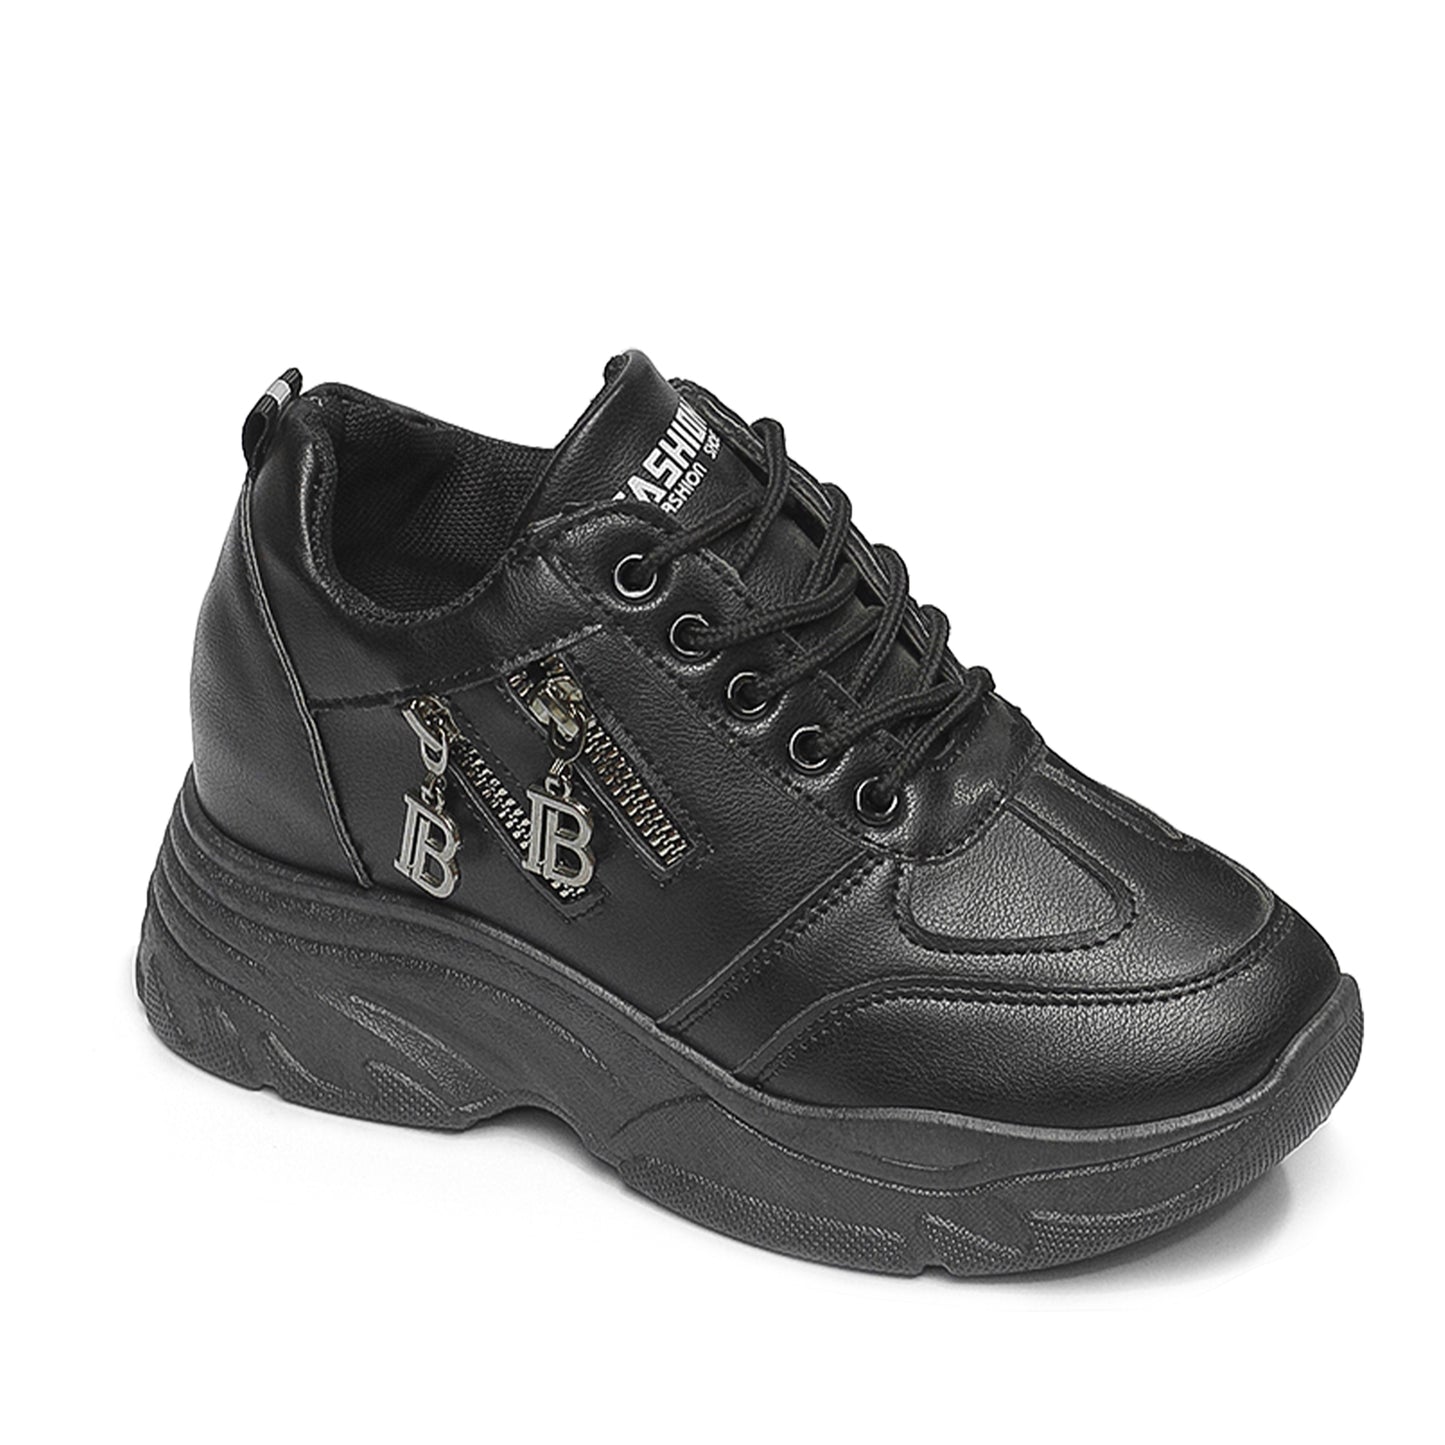 Black Sneakers Casual Design For Girls